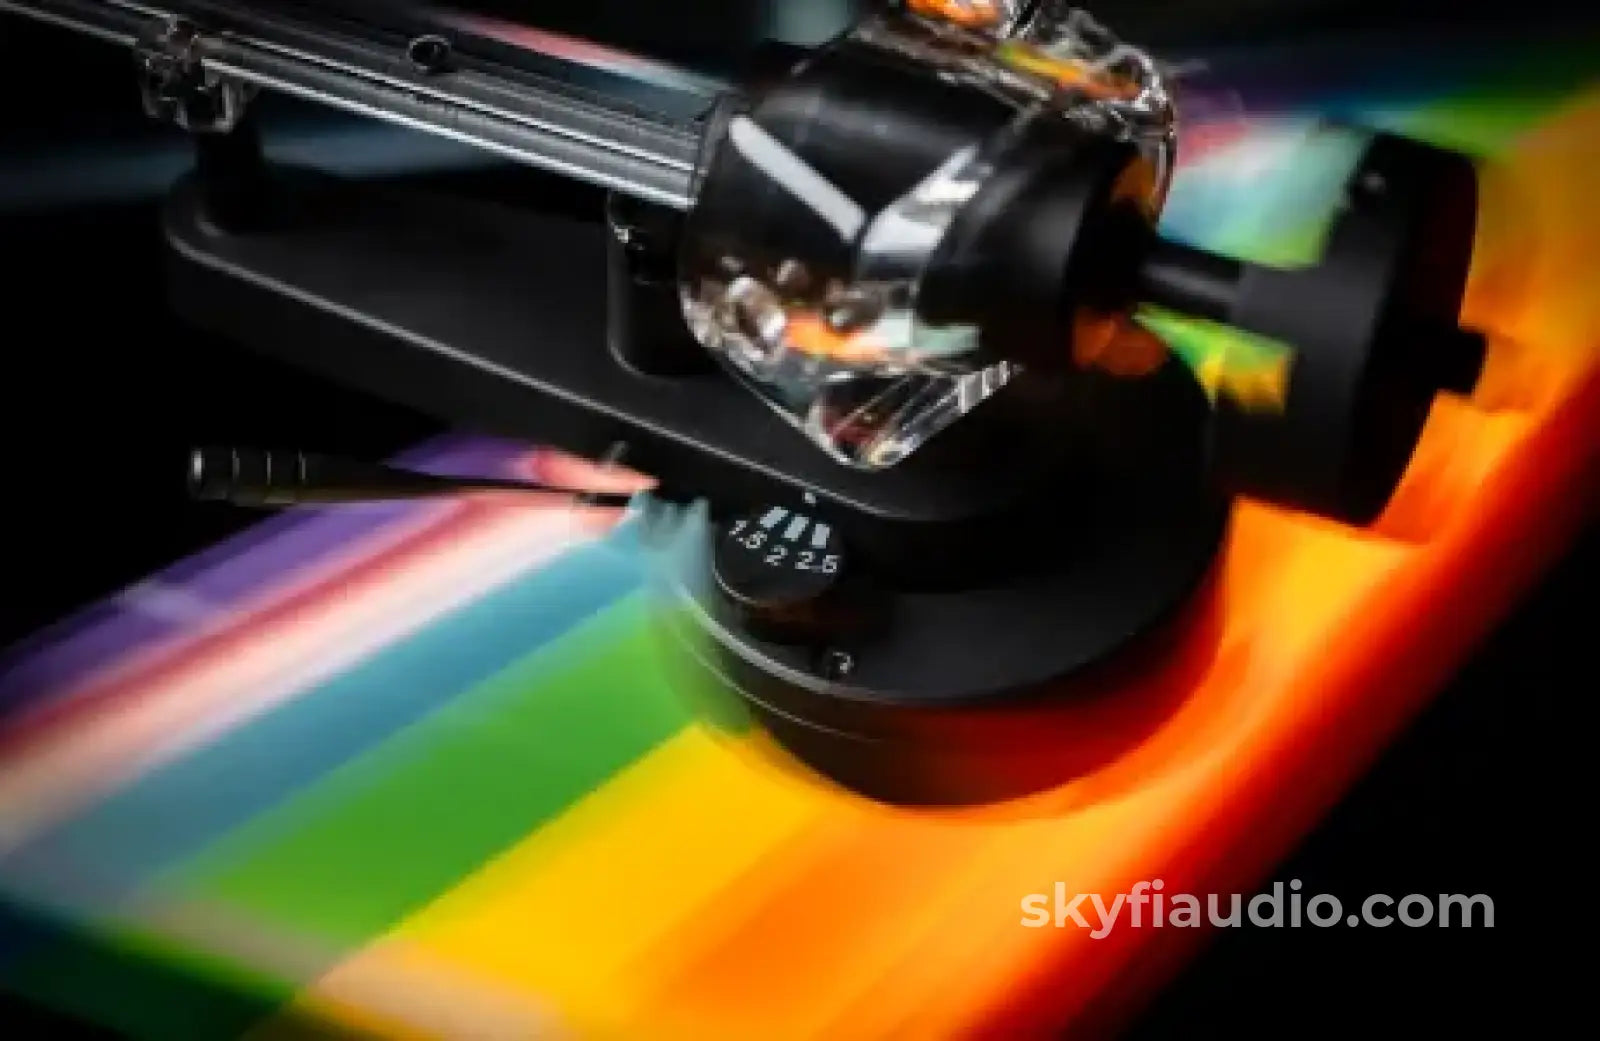 Pro-Ject Dark Side Of The Moon Turntable - Limited Edition Pre-Order